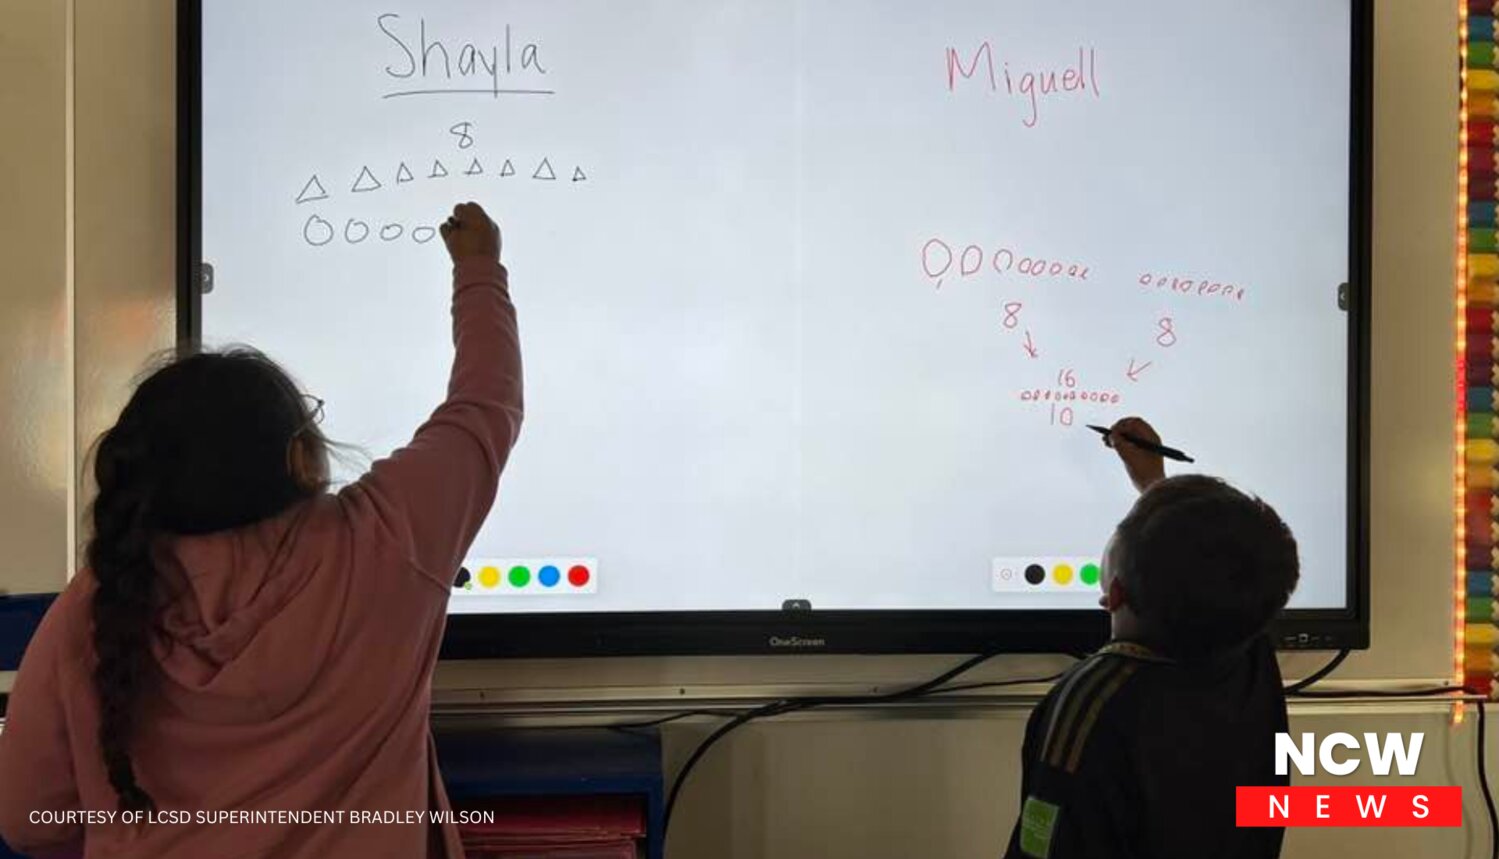 Students engage in direct hands-on learning utilizing their classroom’s new Touchscreen.